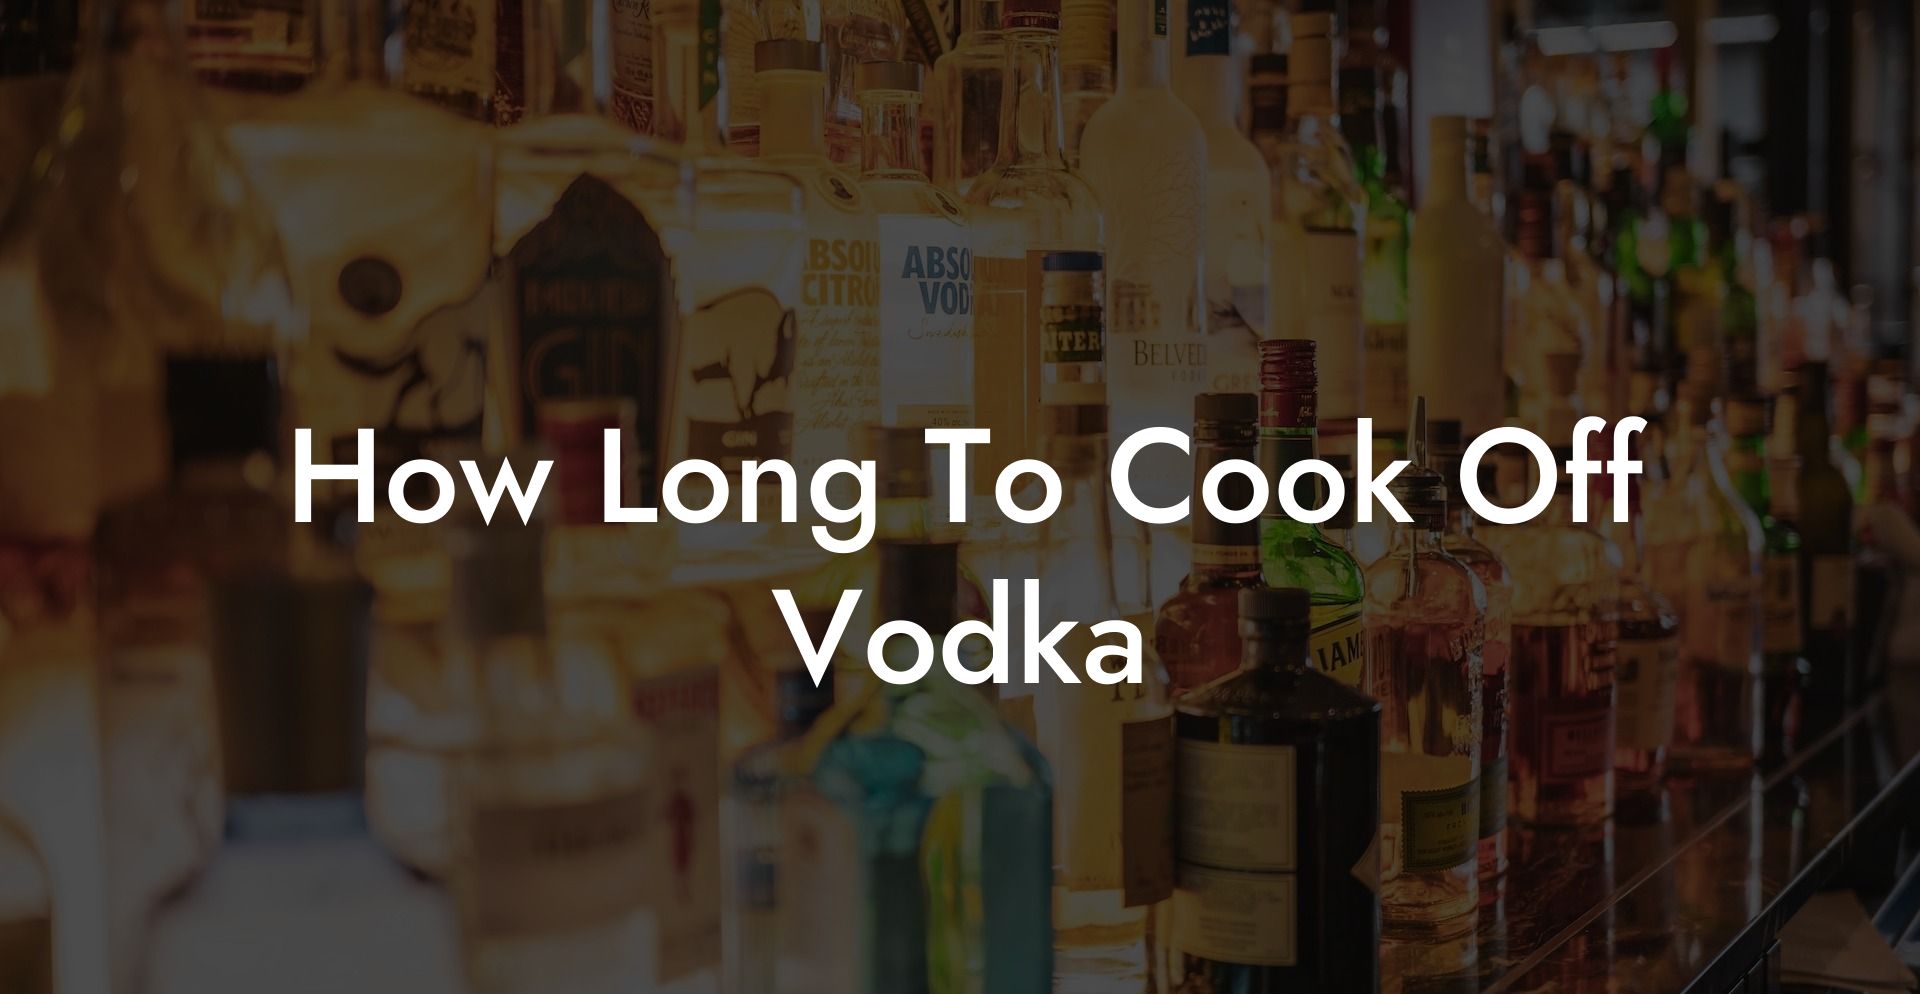 How Long To Cook Off Vodka